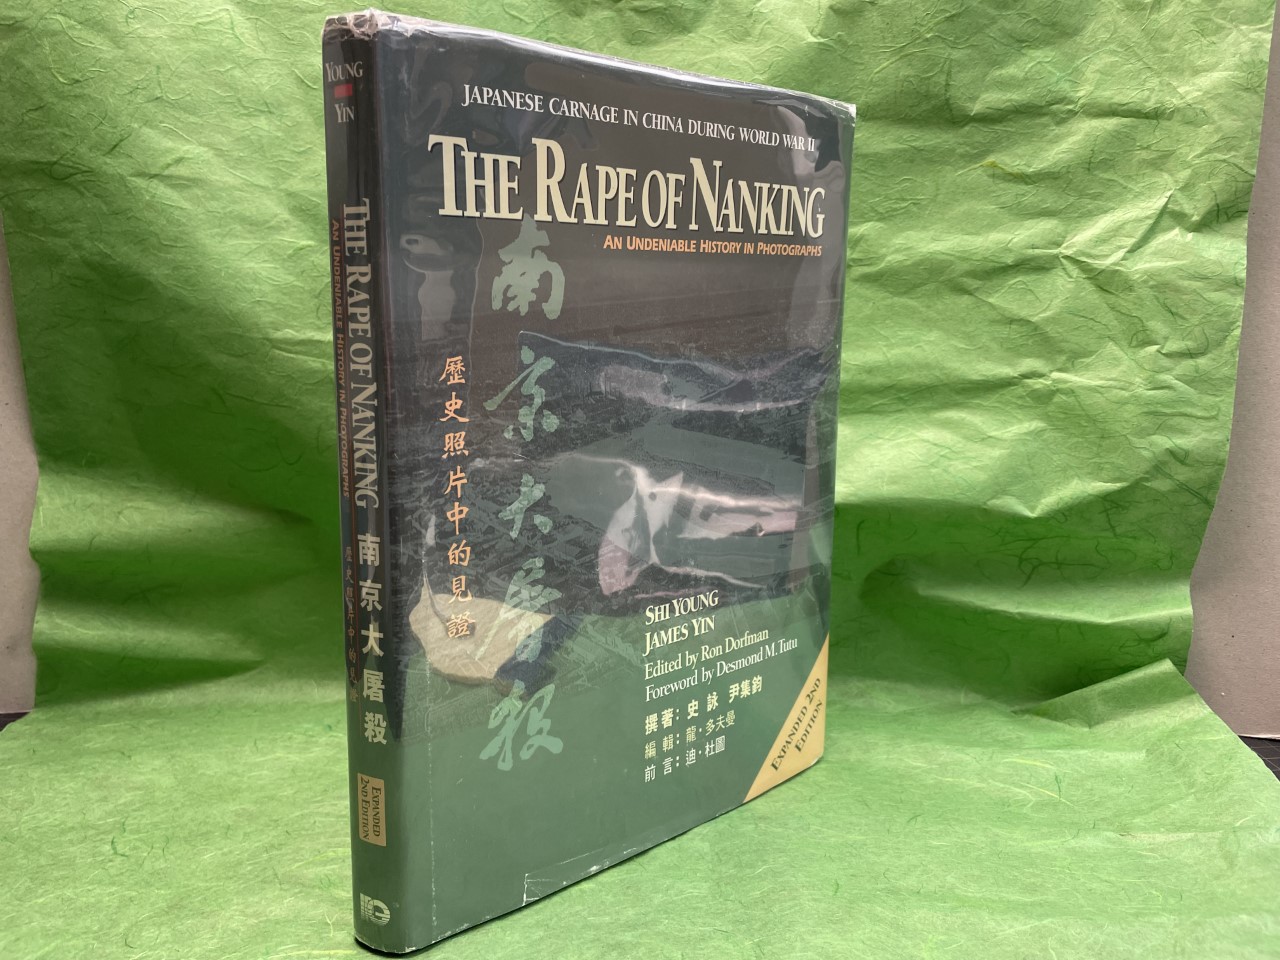 THE RAPE OF NANKING : An Undeniable History in Photographs ( signed ) - Shi Young & James Yin